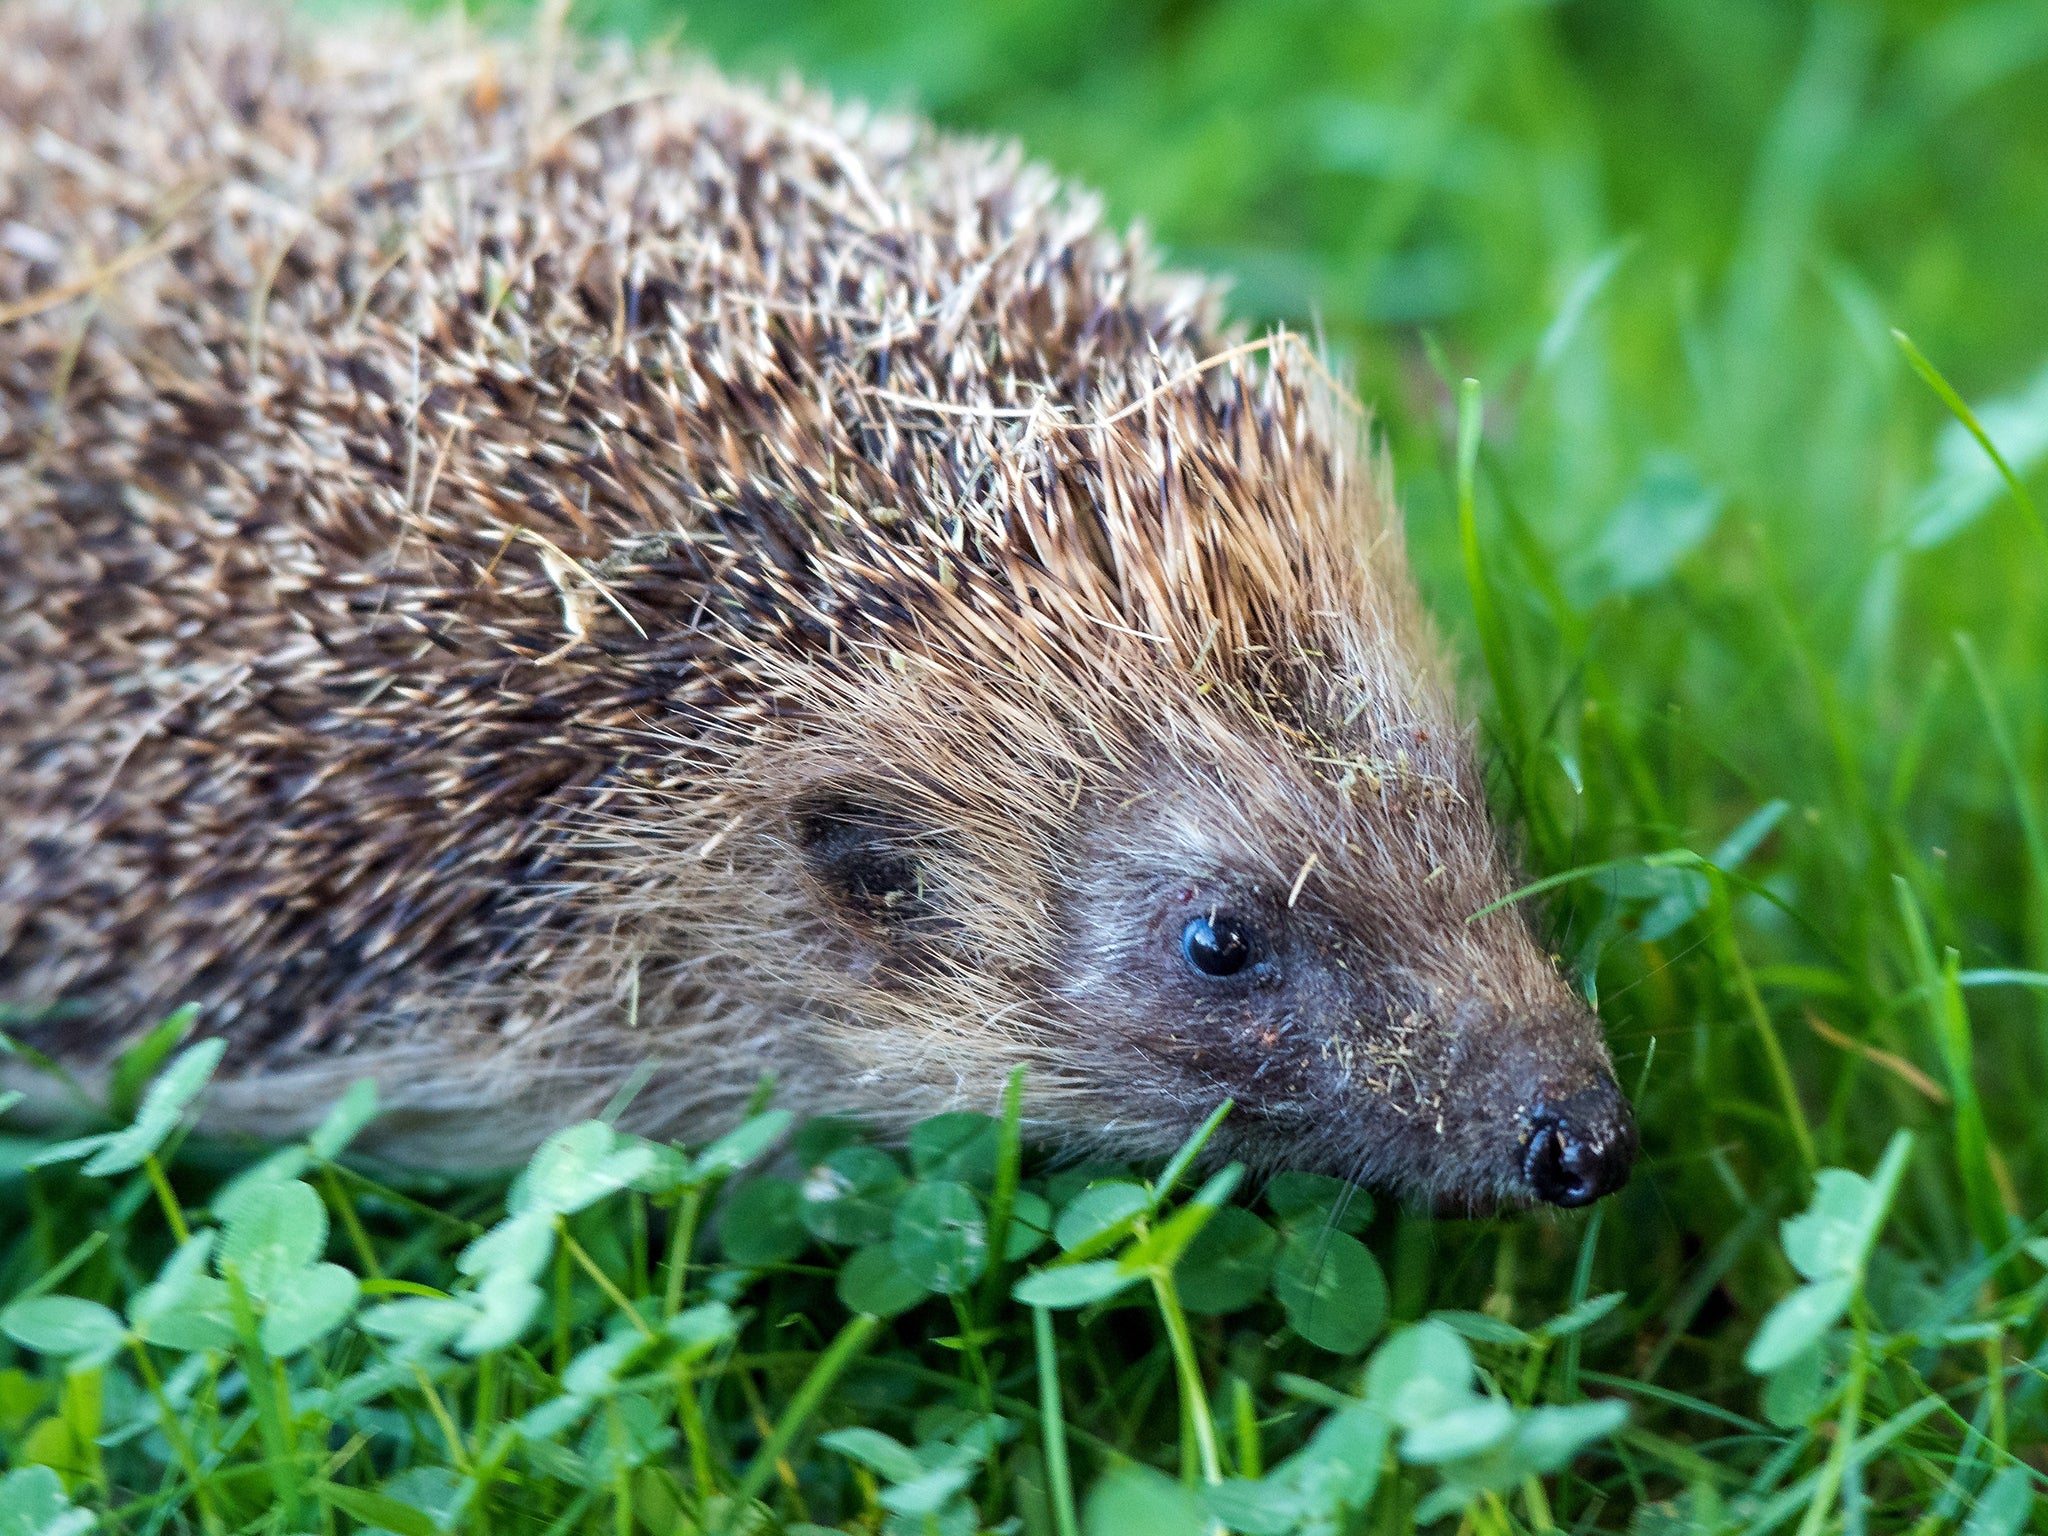 Campaigners want people to makes holes in garden fences to create a superhighway for hedgehogs